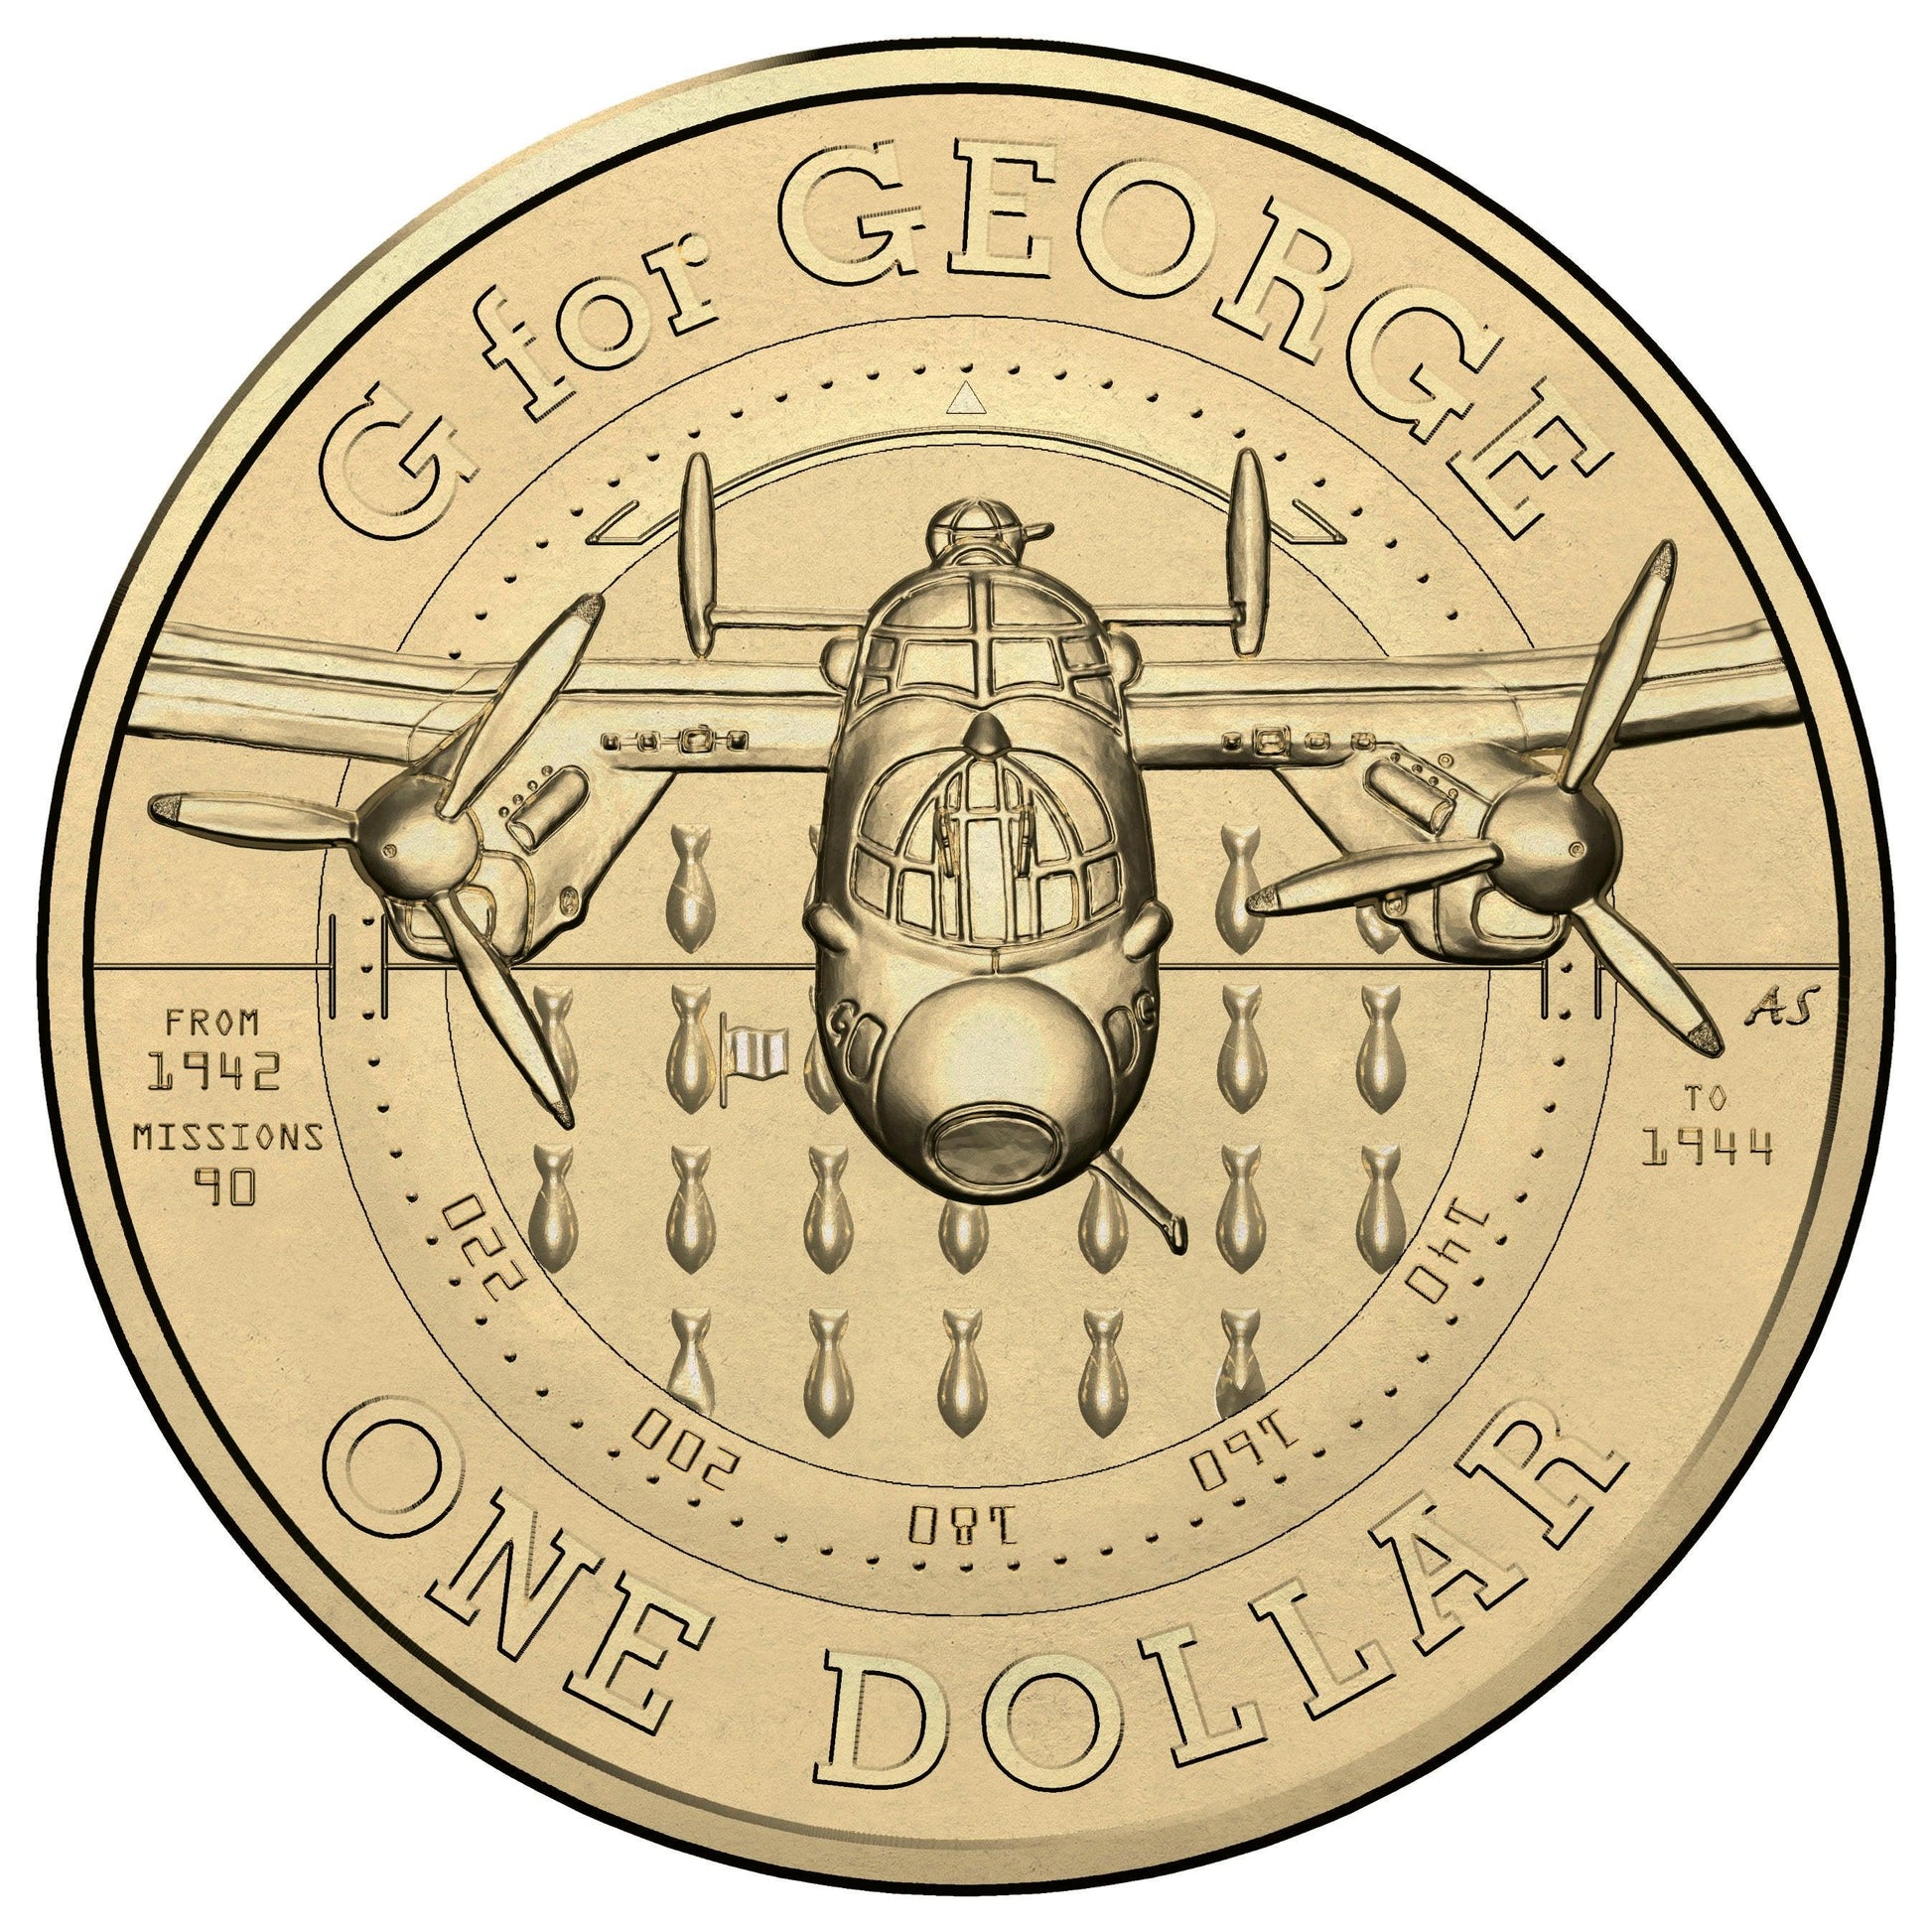 2014 70TH ANNIVERSARY OF THE RETIREMENT OF ‘G FOR GEORGE’ - Uncirculated $1 Coins - Loose Change Coins